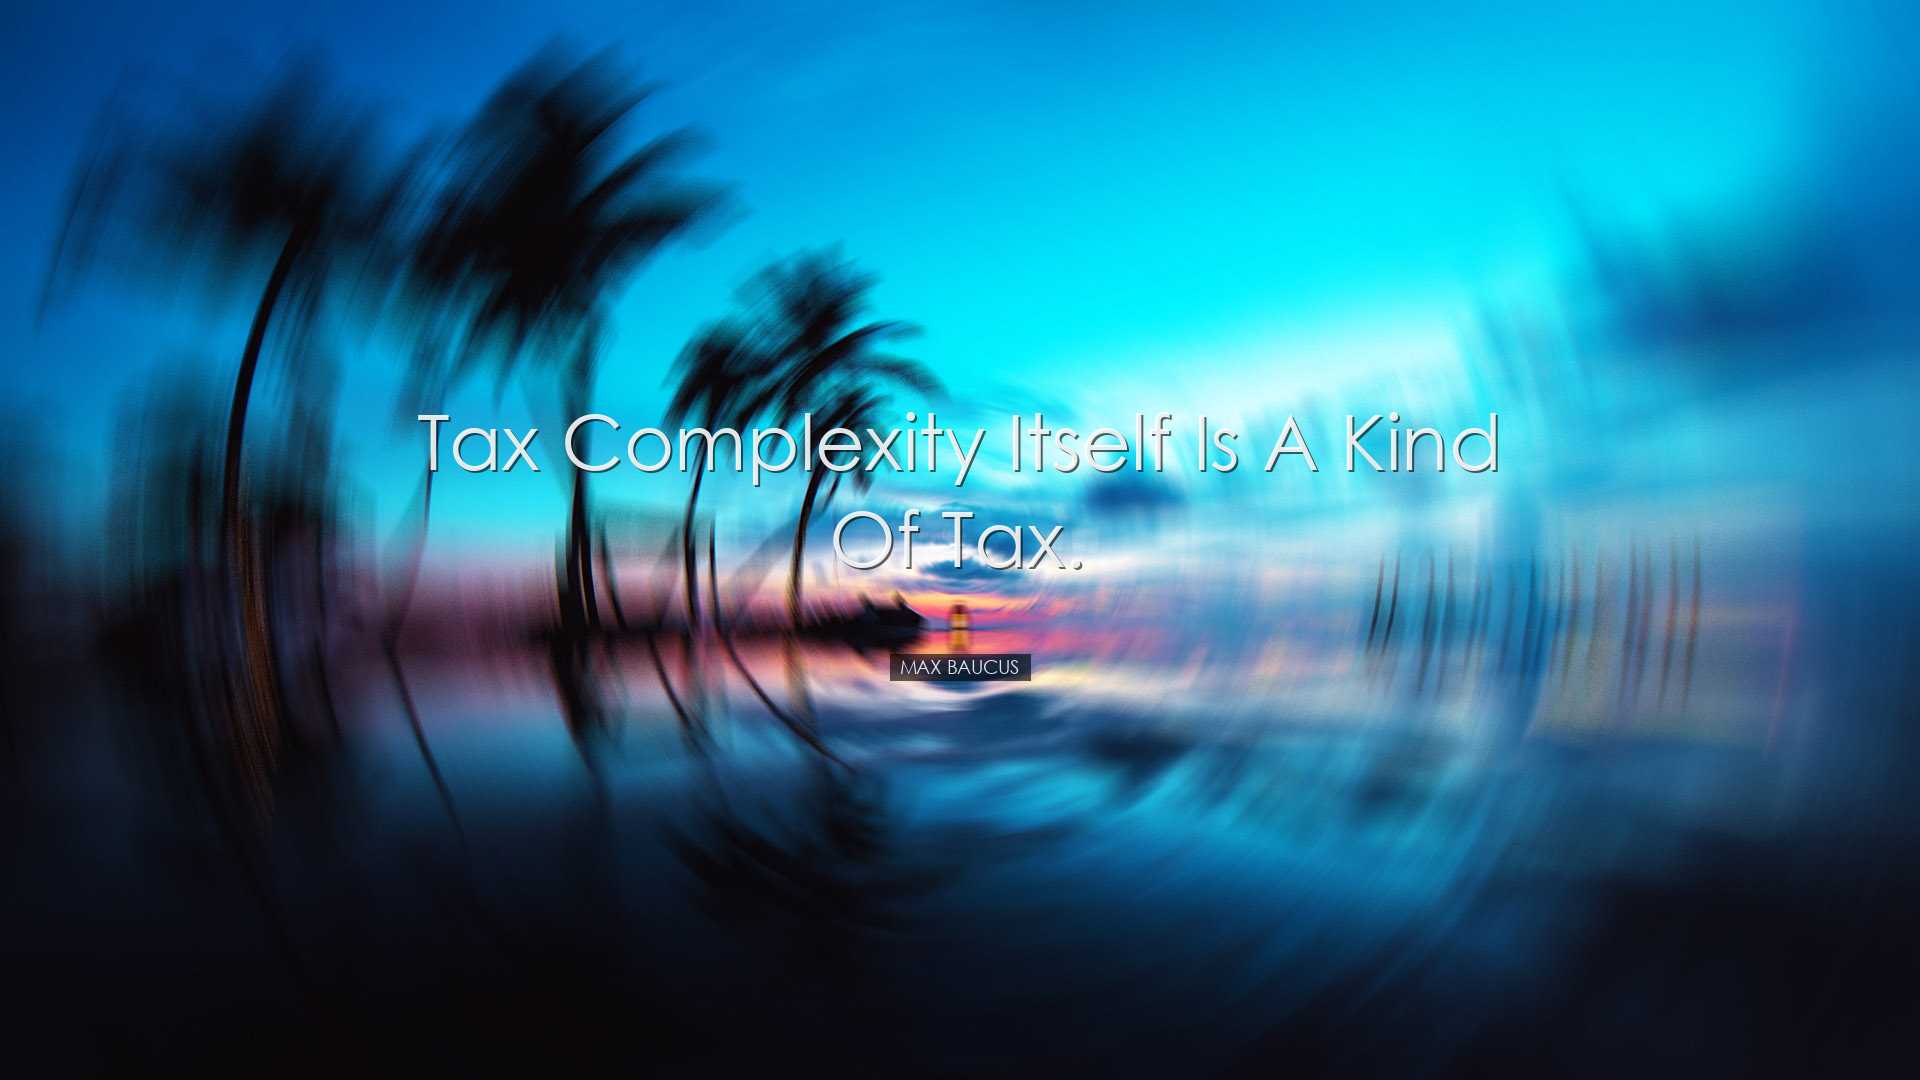 Tax complexity itself is a kind of tax. - Max Baucus